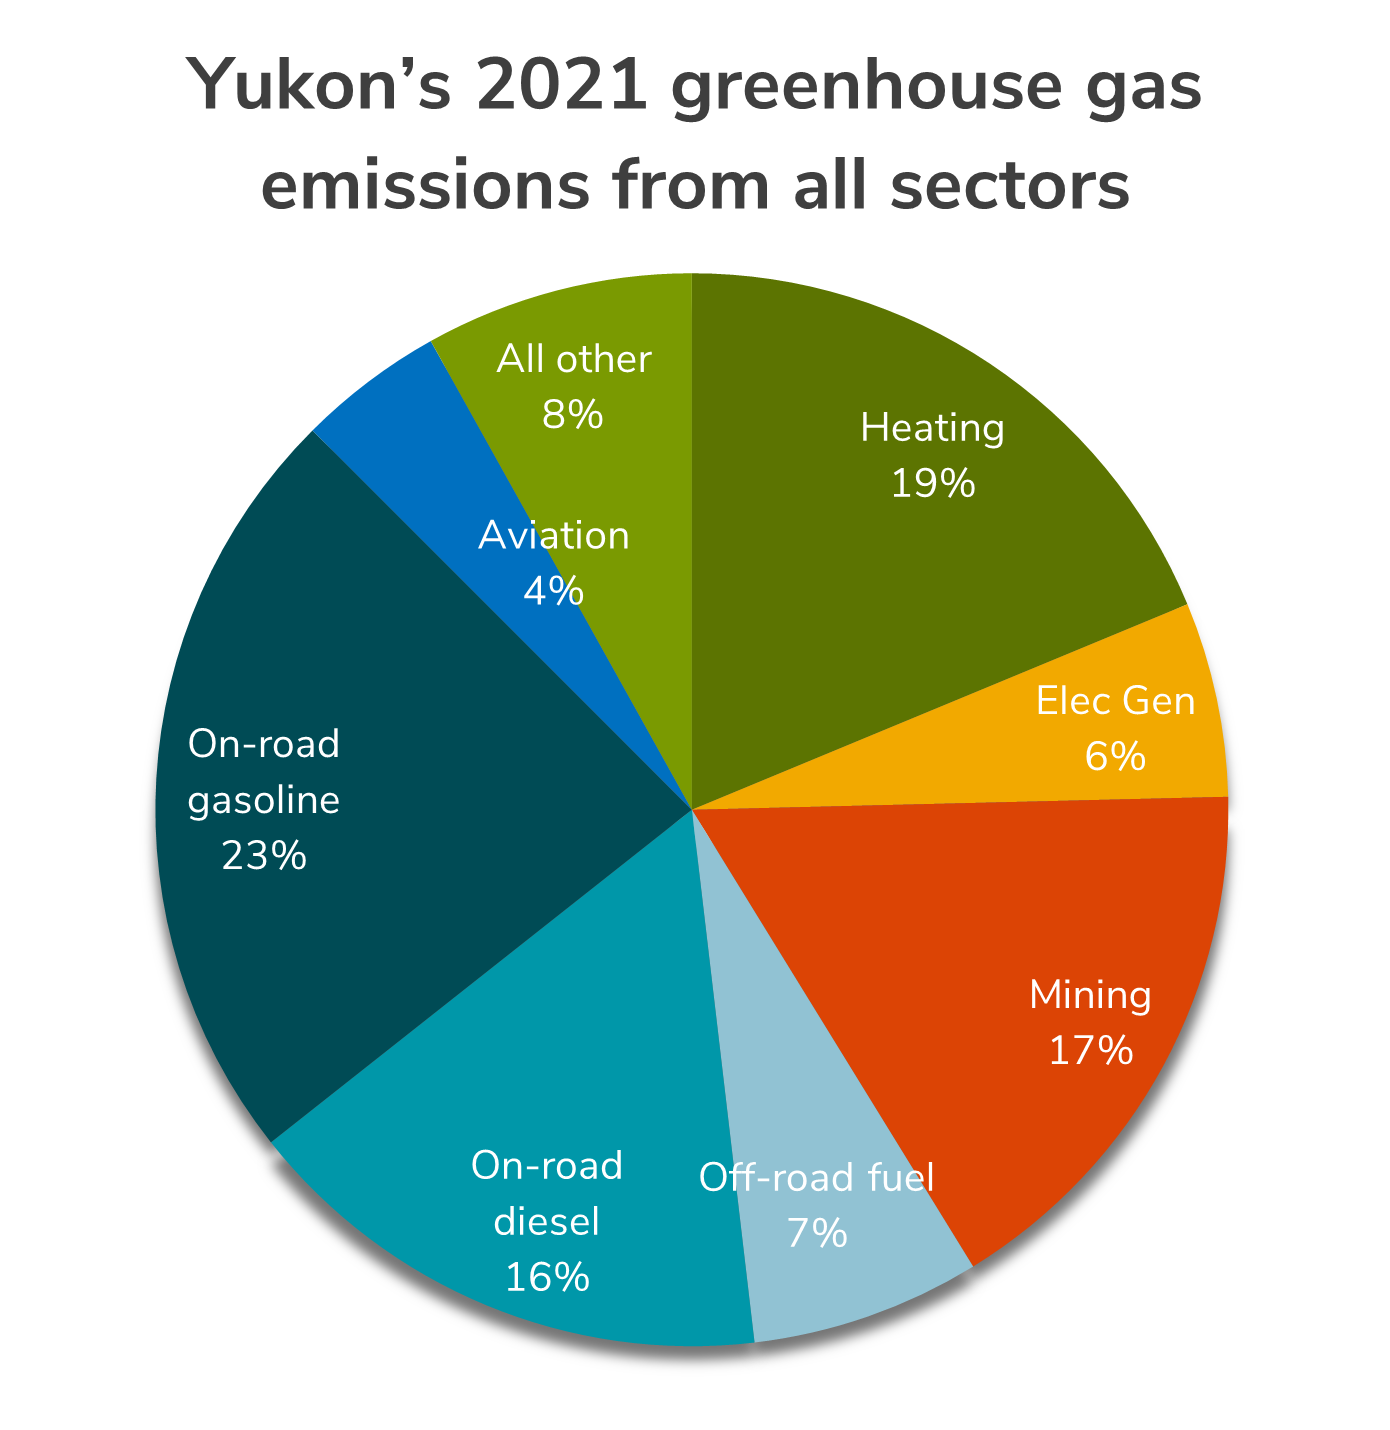 Pie chart showing Yukon's 2021 greenhouse gas emissions from all sectors